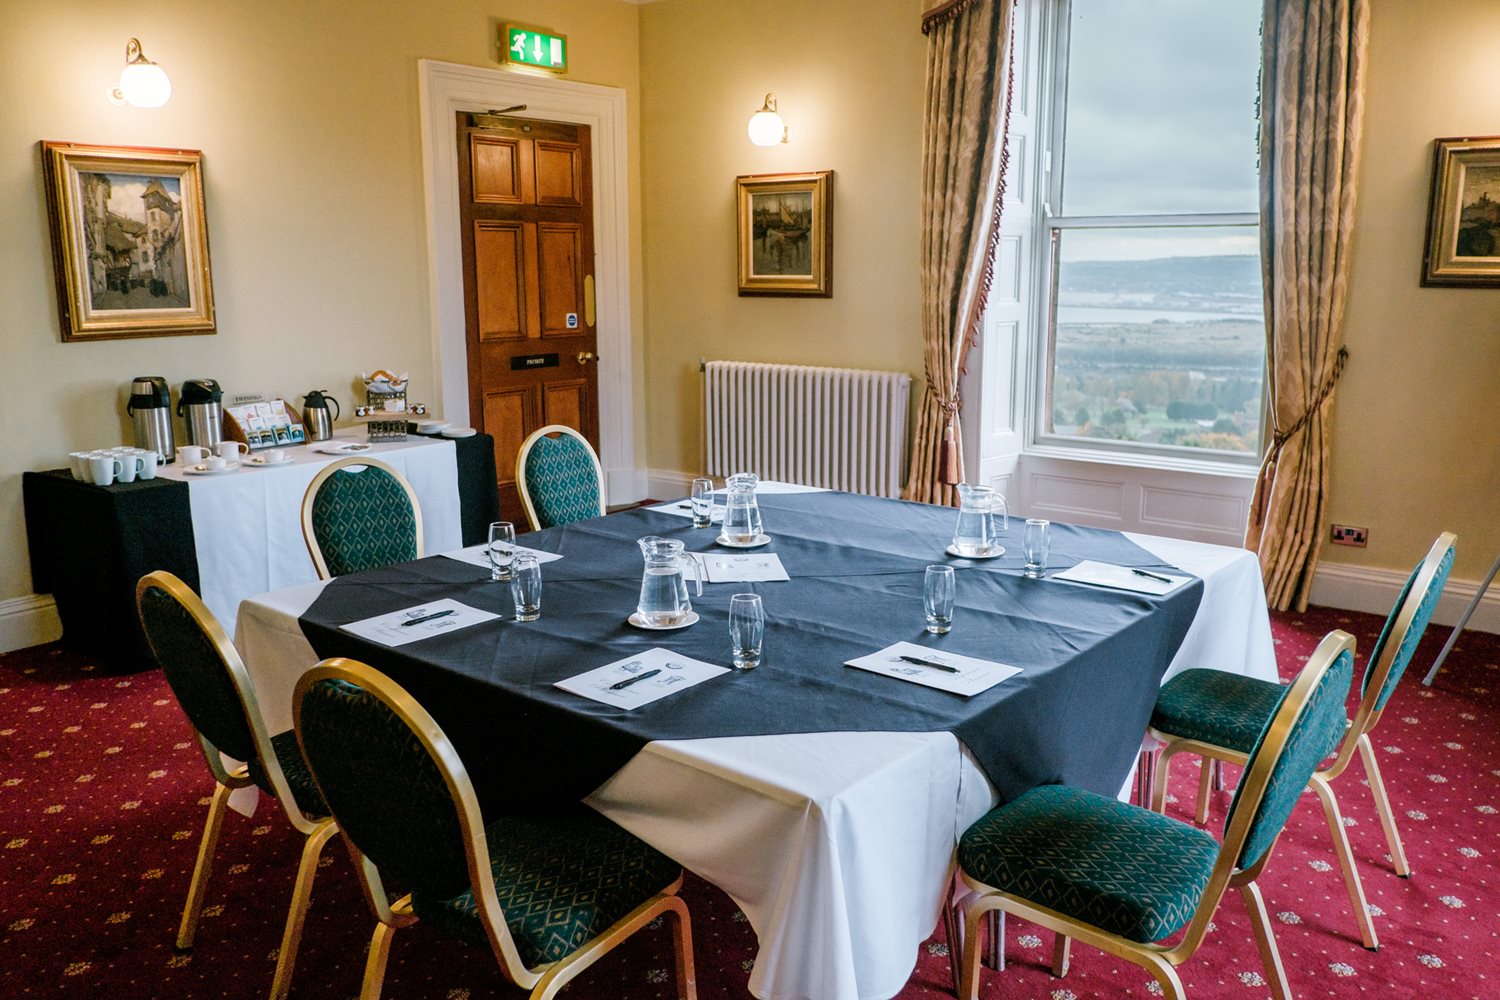 Fisherwick Room with a table and six chairs overlooking Belfast Lough.